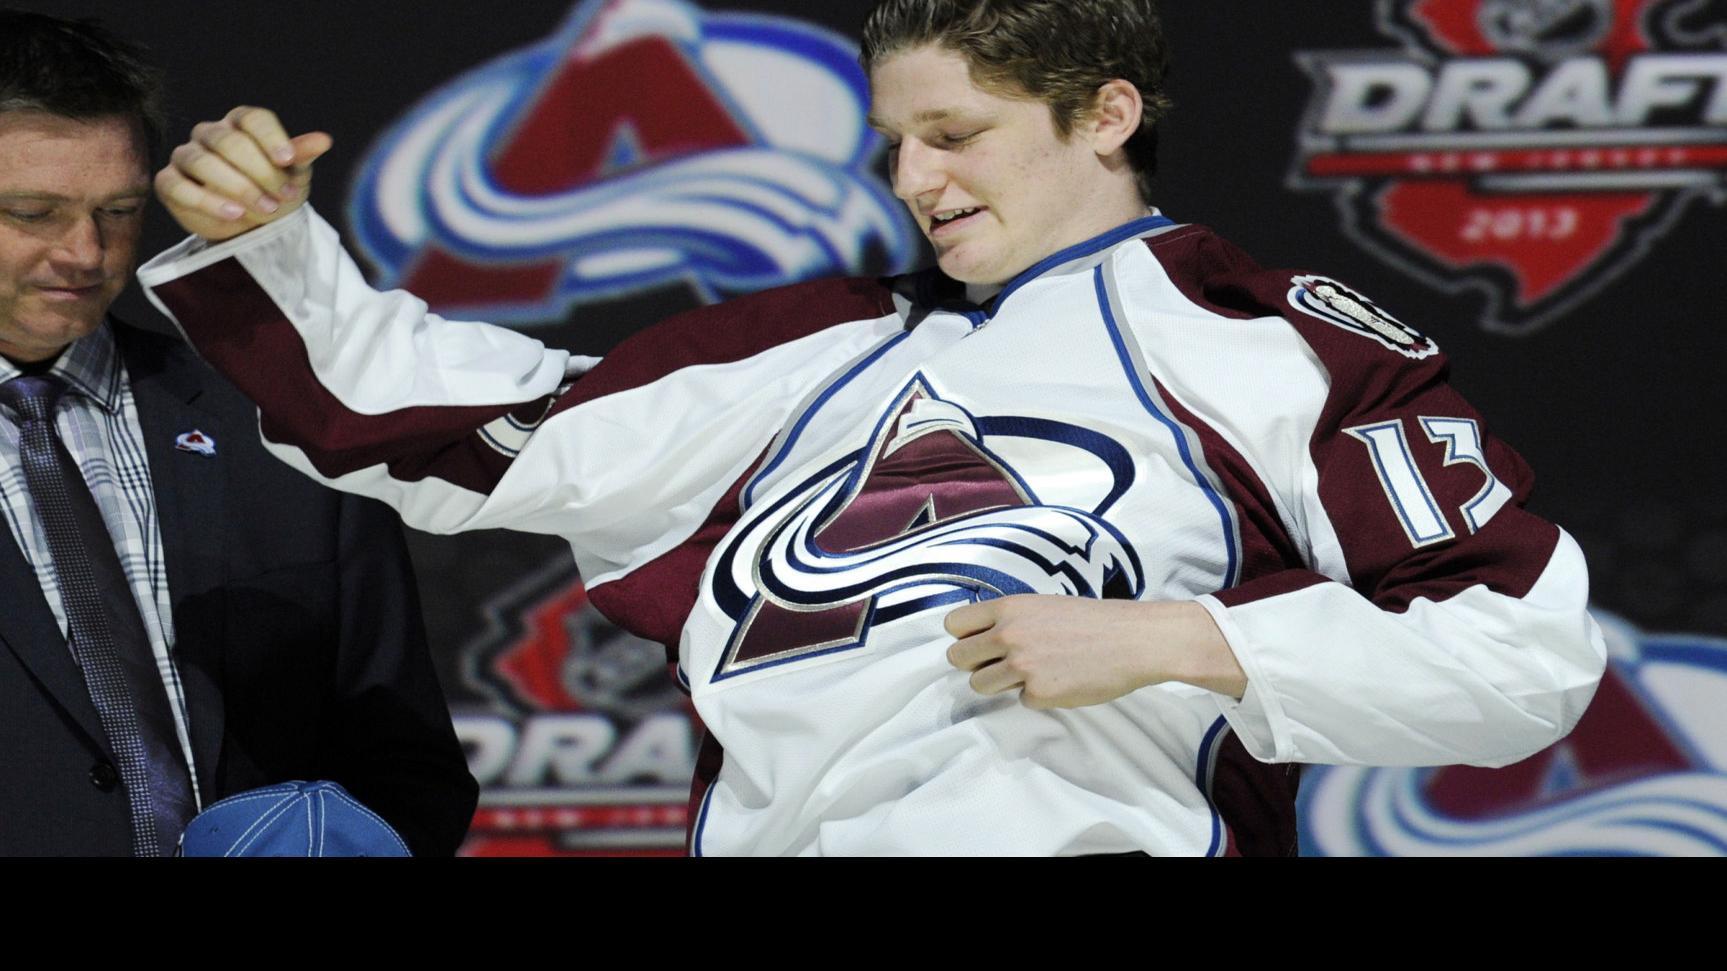 Power line: MacKinnon-led top group lifts Avs into 2nd round